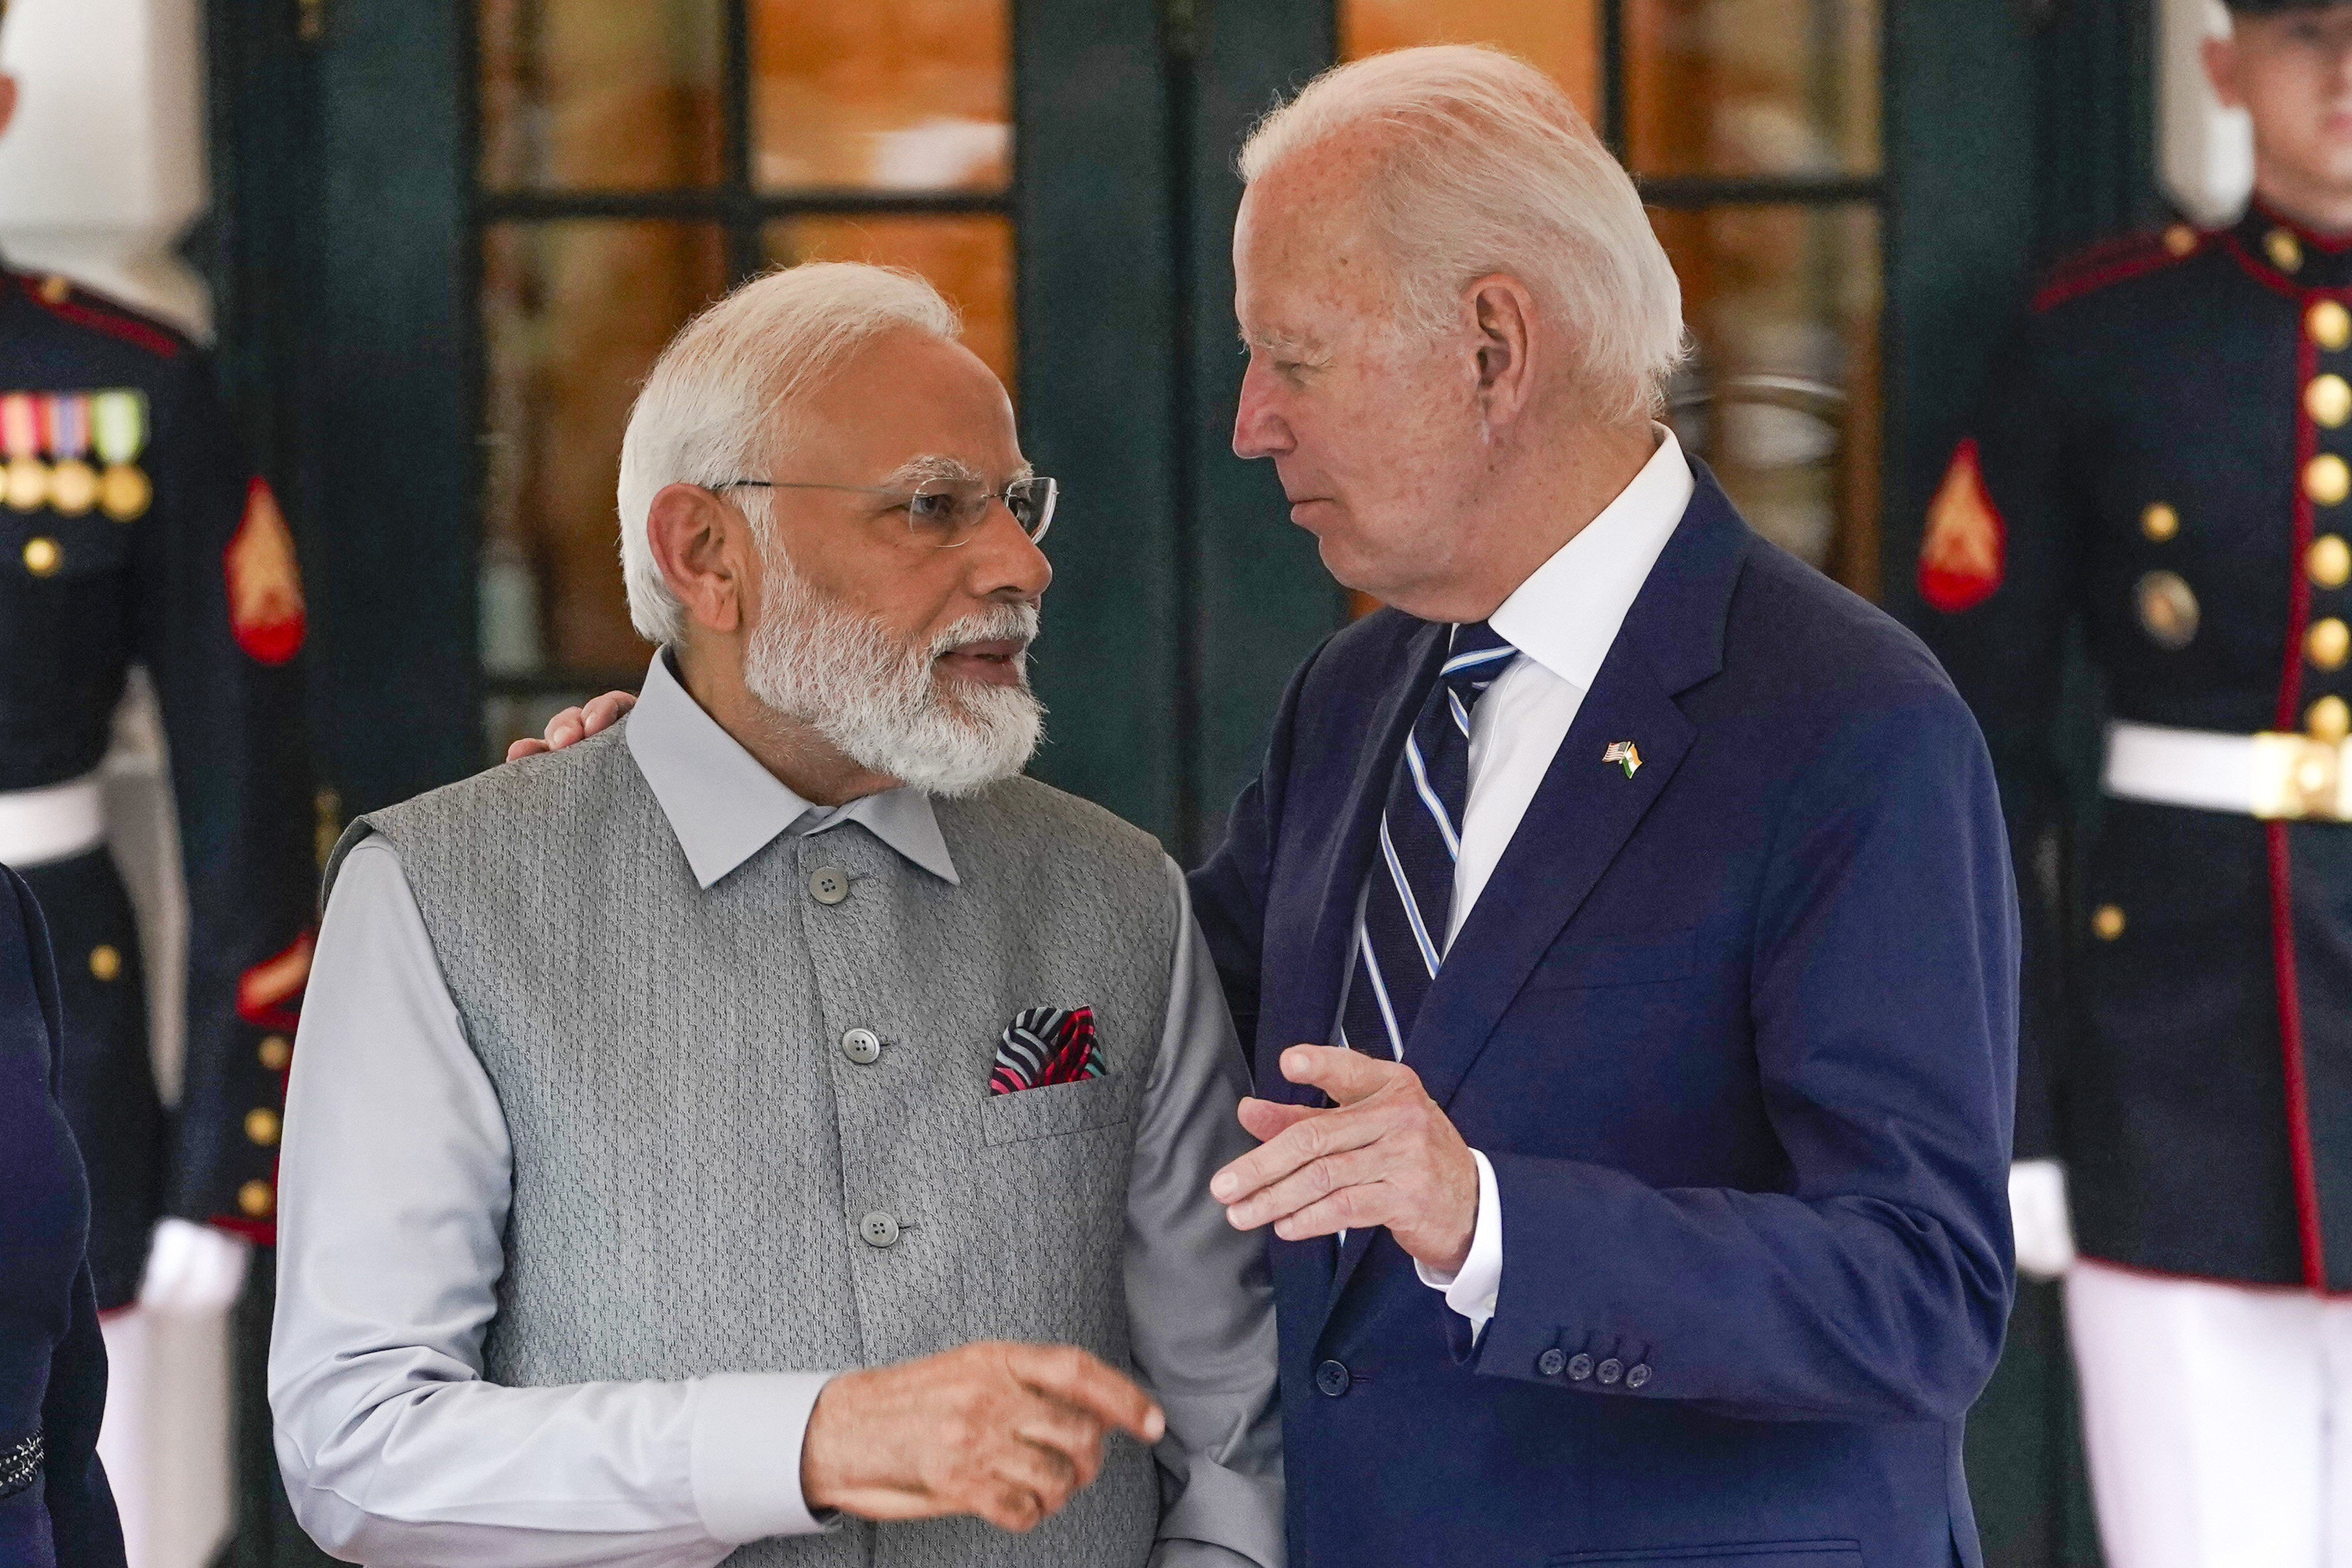 US President Joe Biden talks with India’s Prime Minister Narendra Modi as he arrives at the White House for a private dinner on June 21, 2023, in Washington.